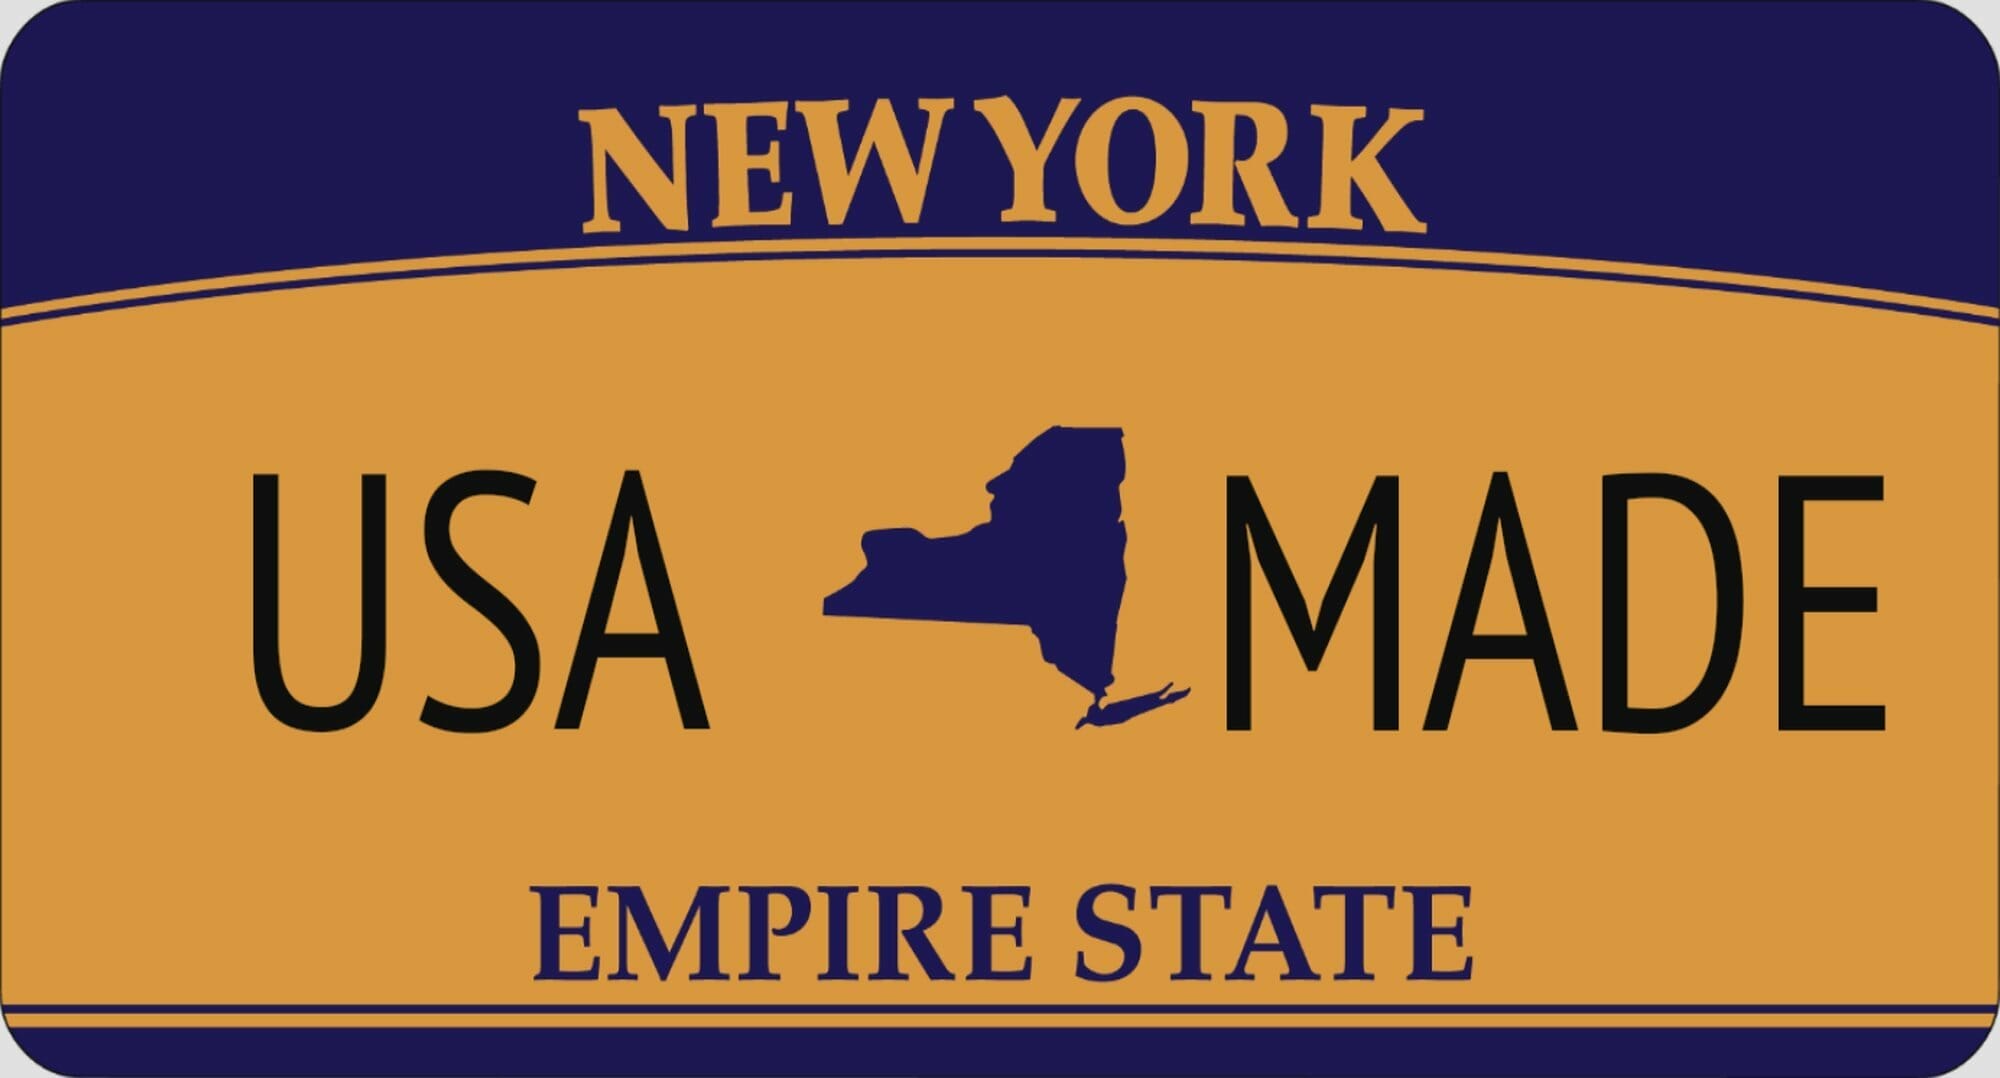 New York Shop by State